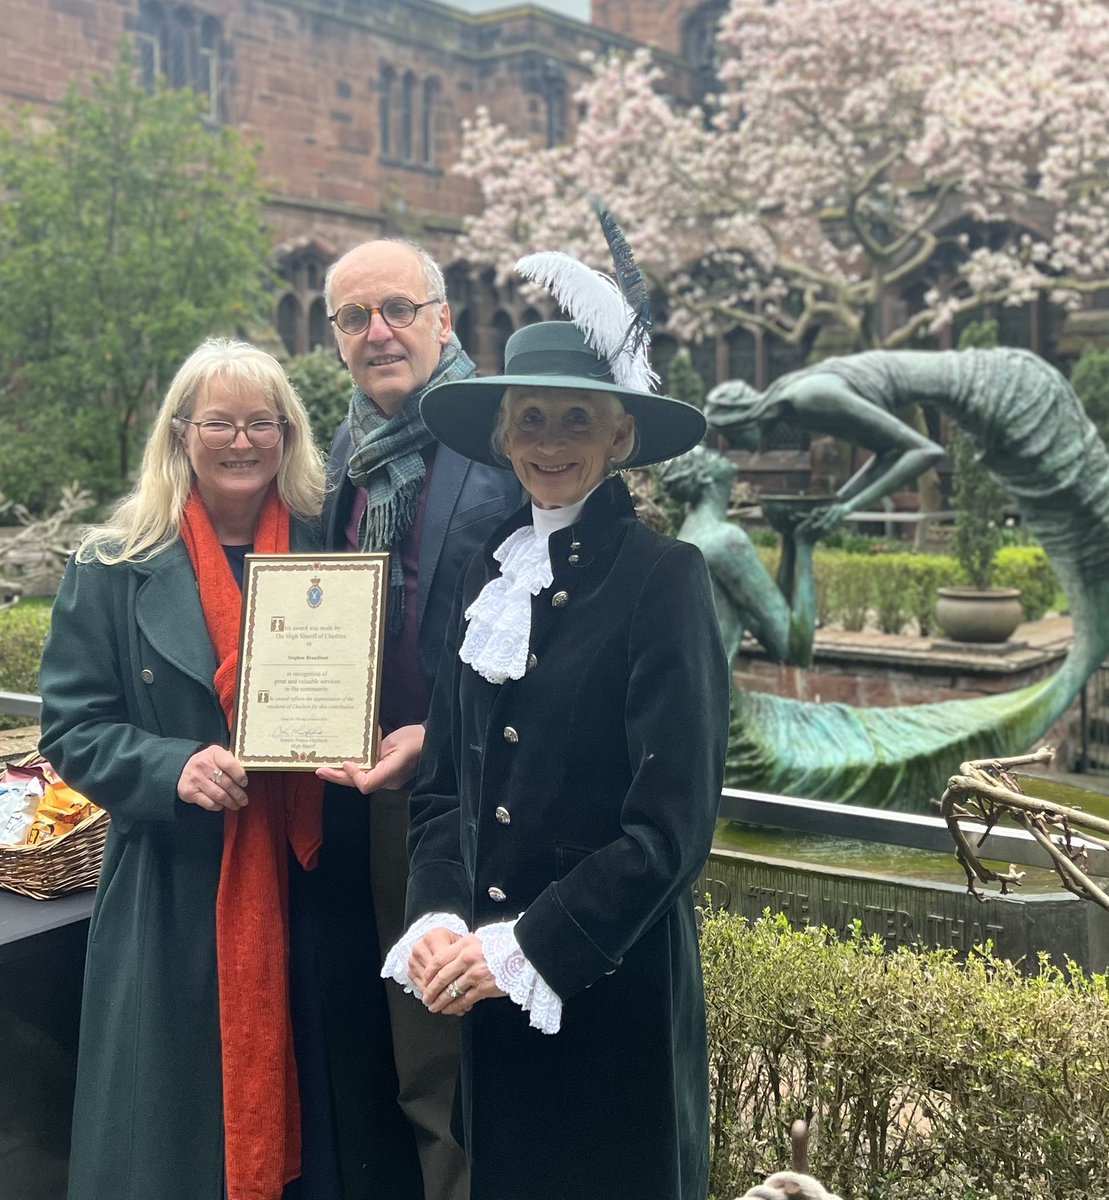 A lovely evening in Chester Cathedral cloister garden to receive an unexpected award from the wonderfully encouraging High Sheriff Jeannie France-Hayhurst. A recognition that’s received with great thanks.
@SheriffCheshire @ChesterCath #HighSheriff #Award